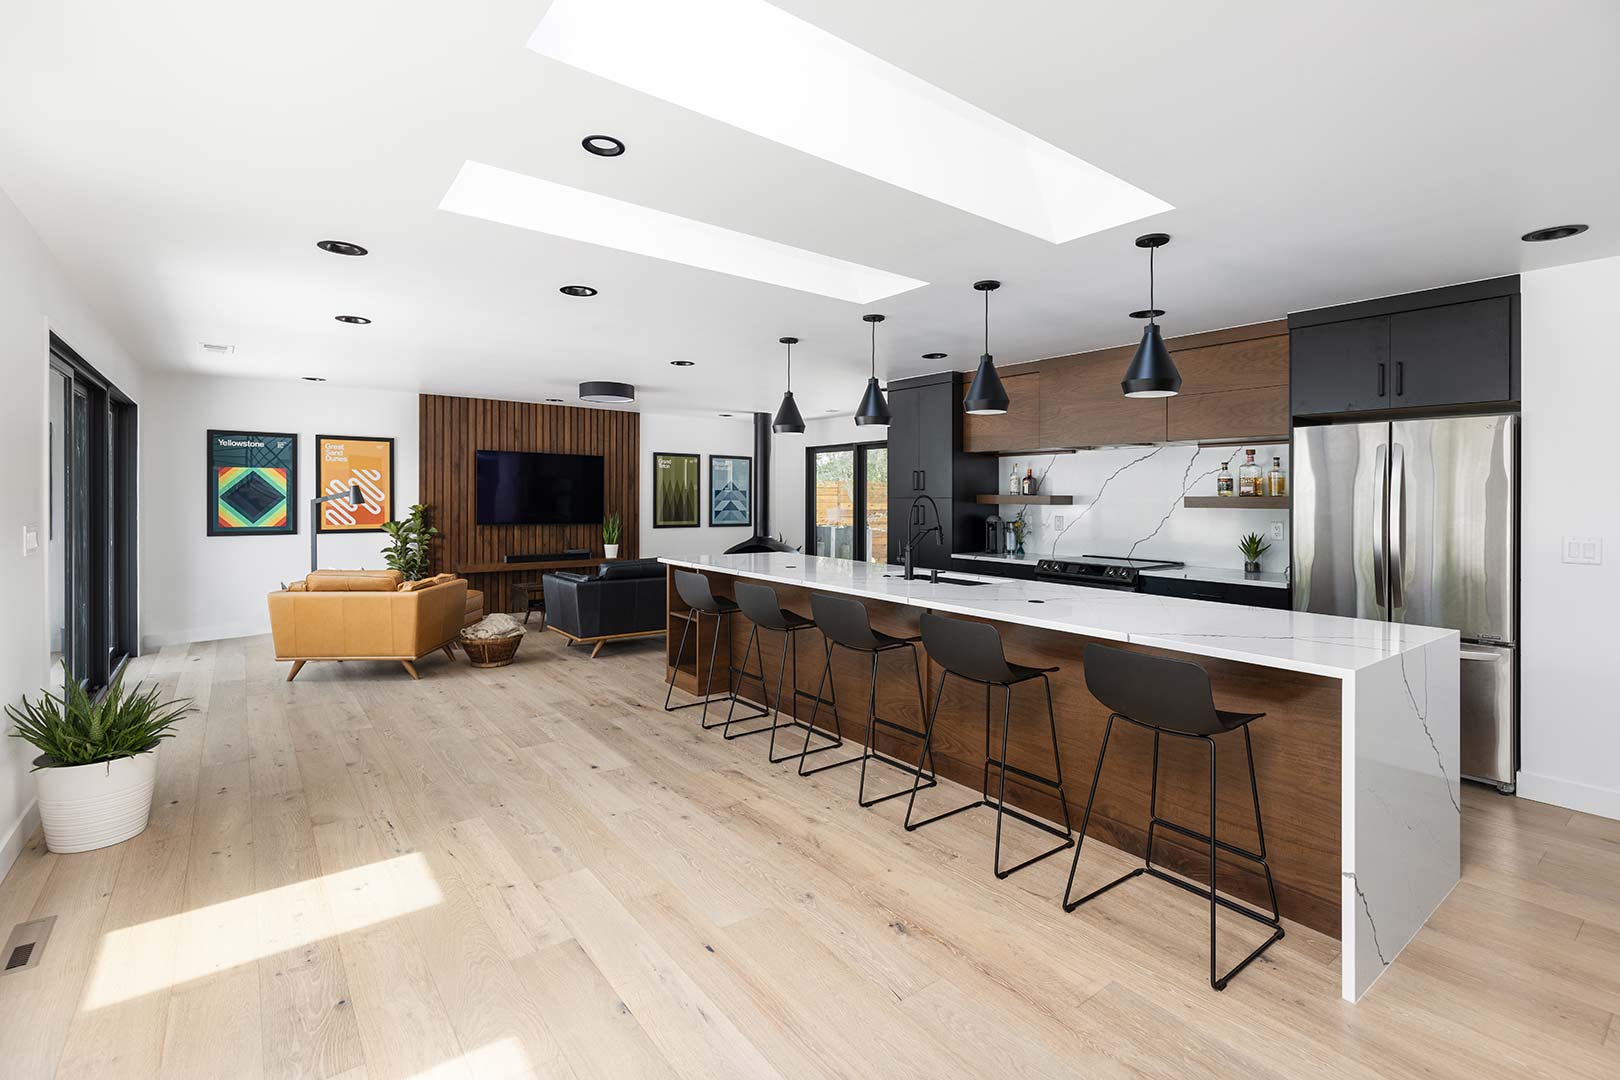 Large waterfall coutertop island with 5 barstools is the feature of this mid-century modern remodel and kitchen renovation in Fort Collins Colorado